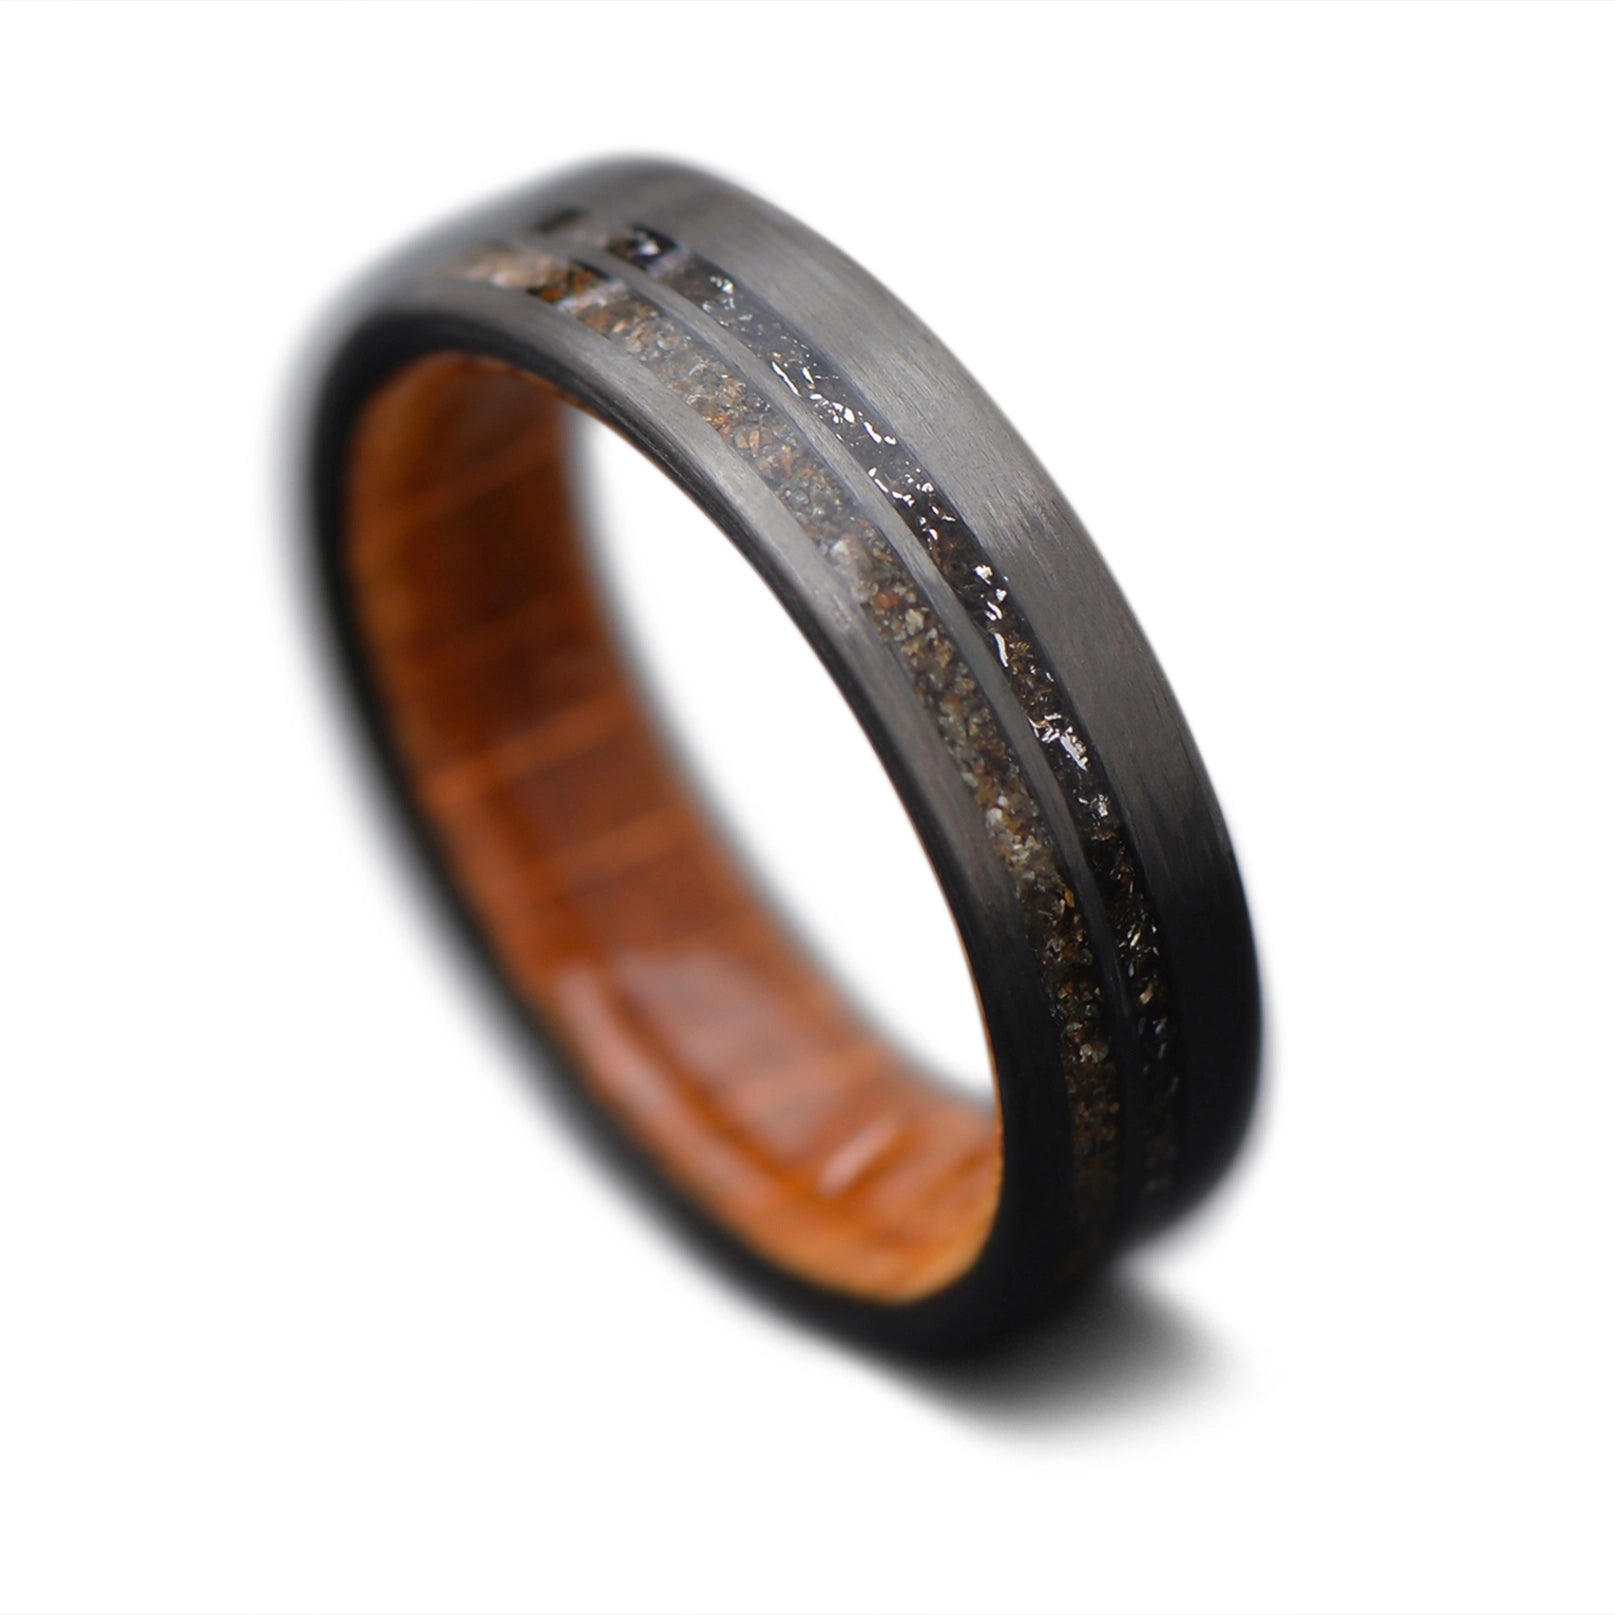 CarbonUni Core Ring with Crushed Plesiosaurs, Meteorite inlay and  Whiskey Barrel Oak inner sleeve, 6mm - THE INNOVATOR